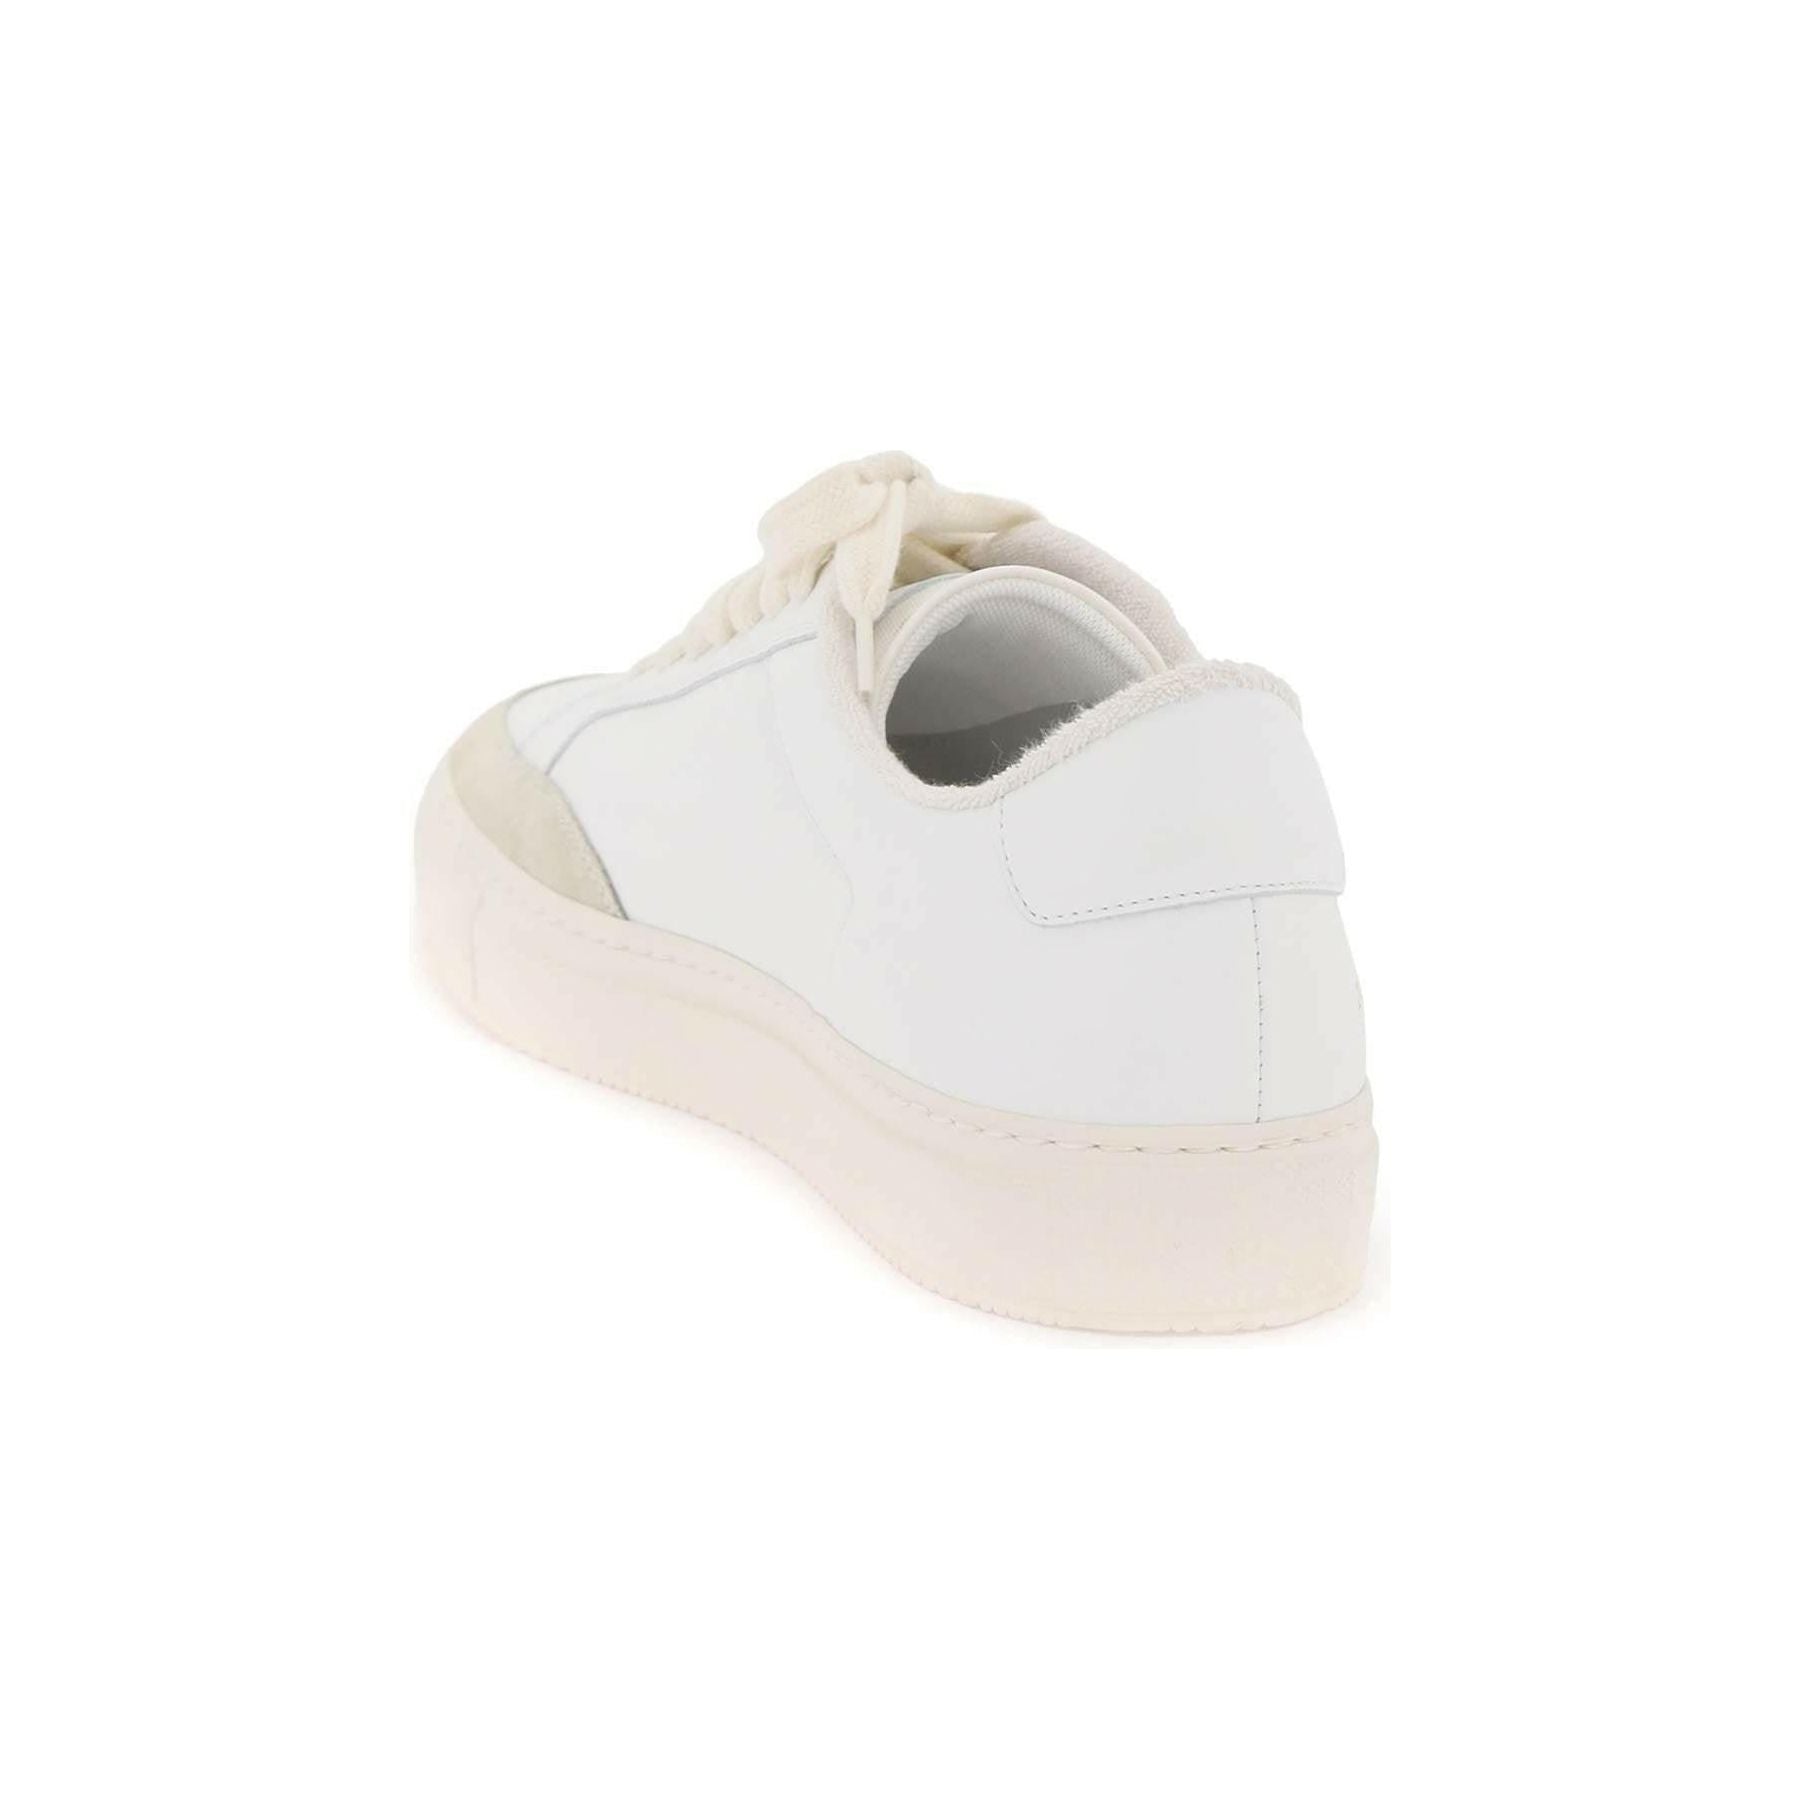 White Tennis Pro Leather and Suede Sneakers COMMON PROJECTS JOHN JULIA.